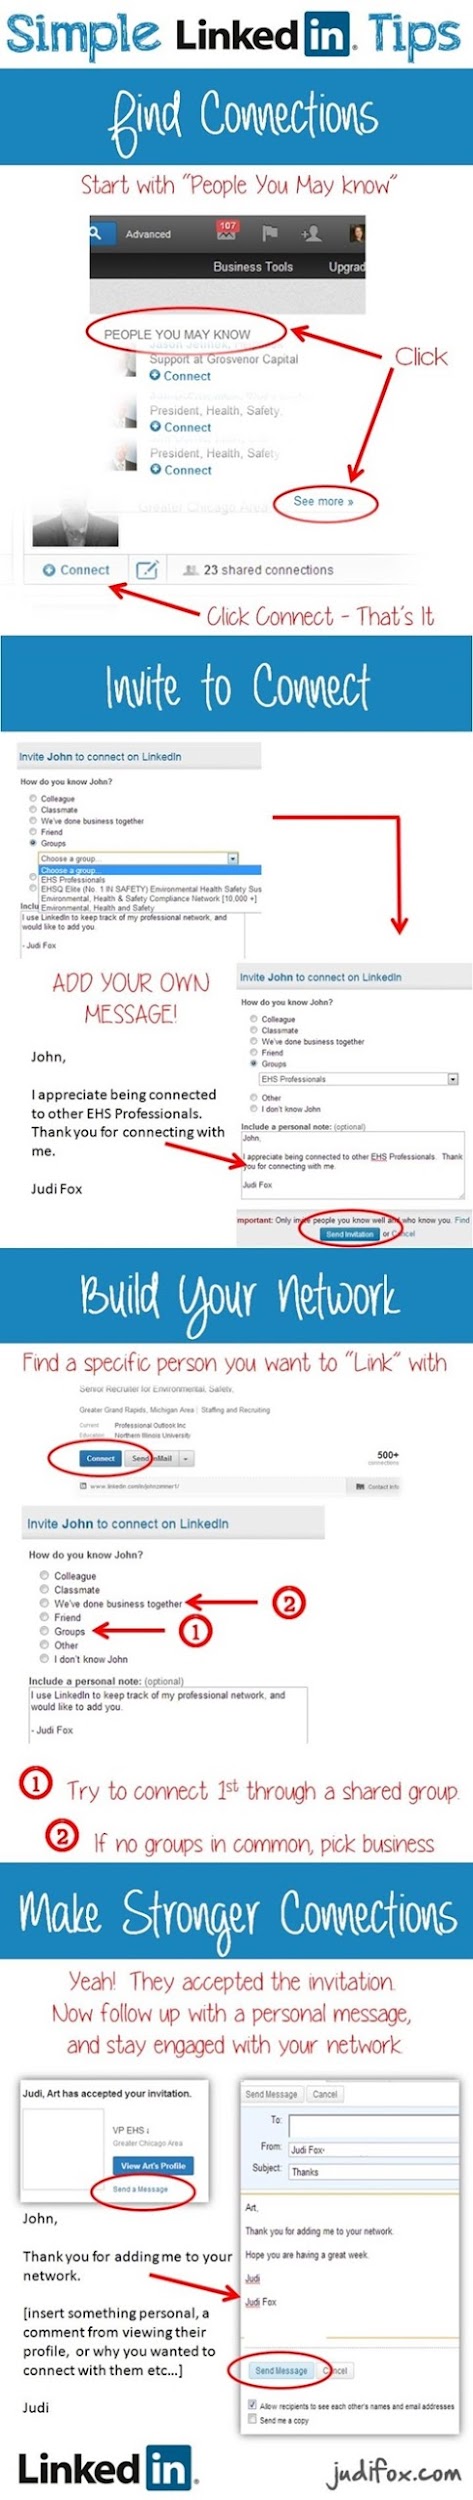 Linkedin tips to connect network and find jobs advance career